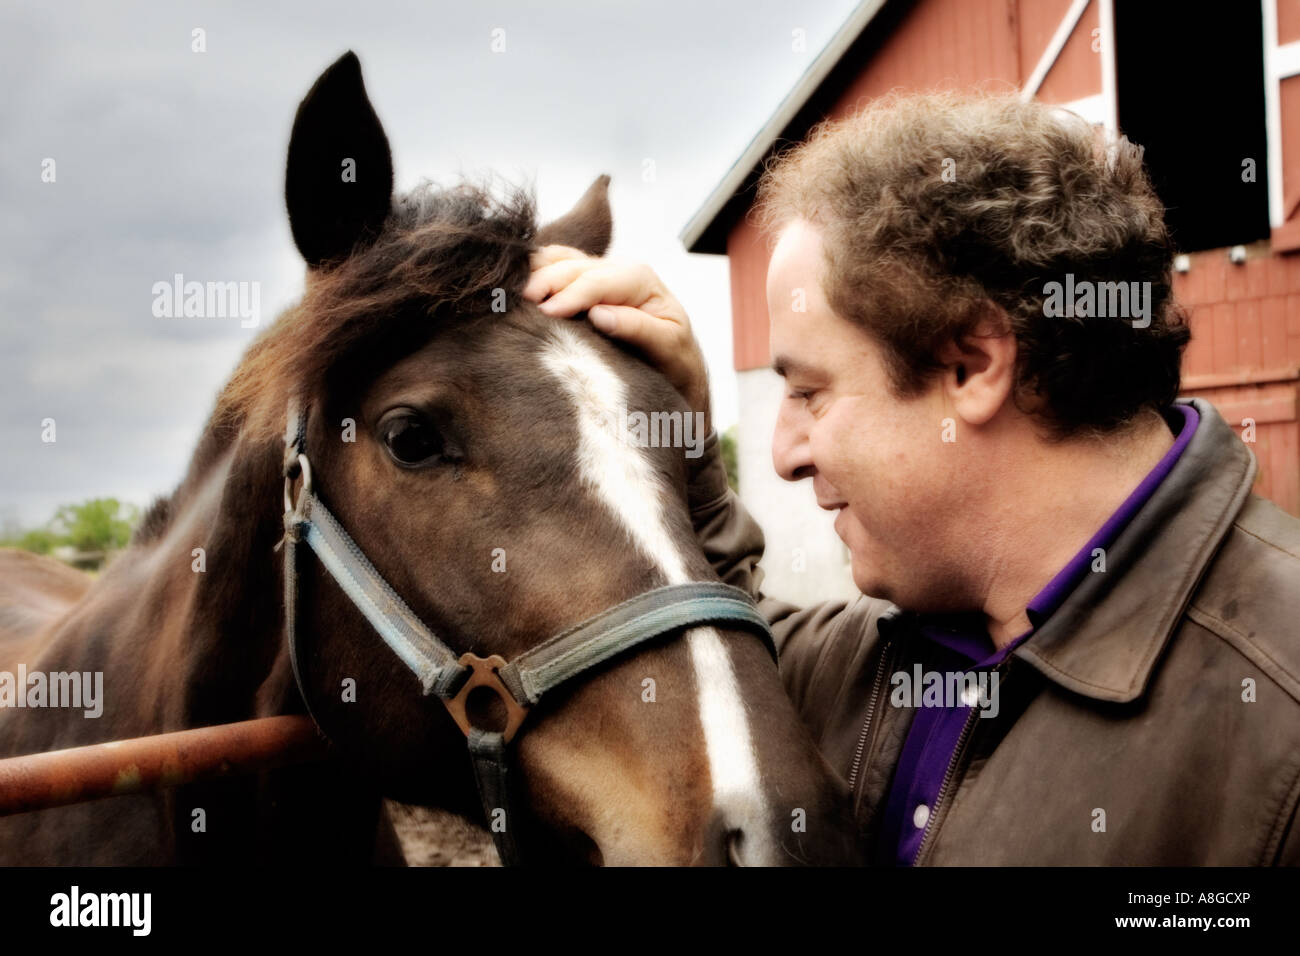 man talking to horse in front of barn Stock Photo